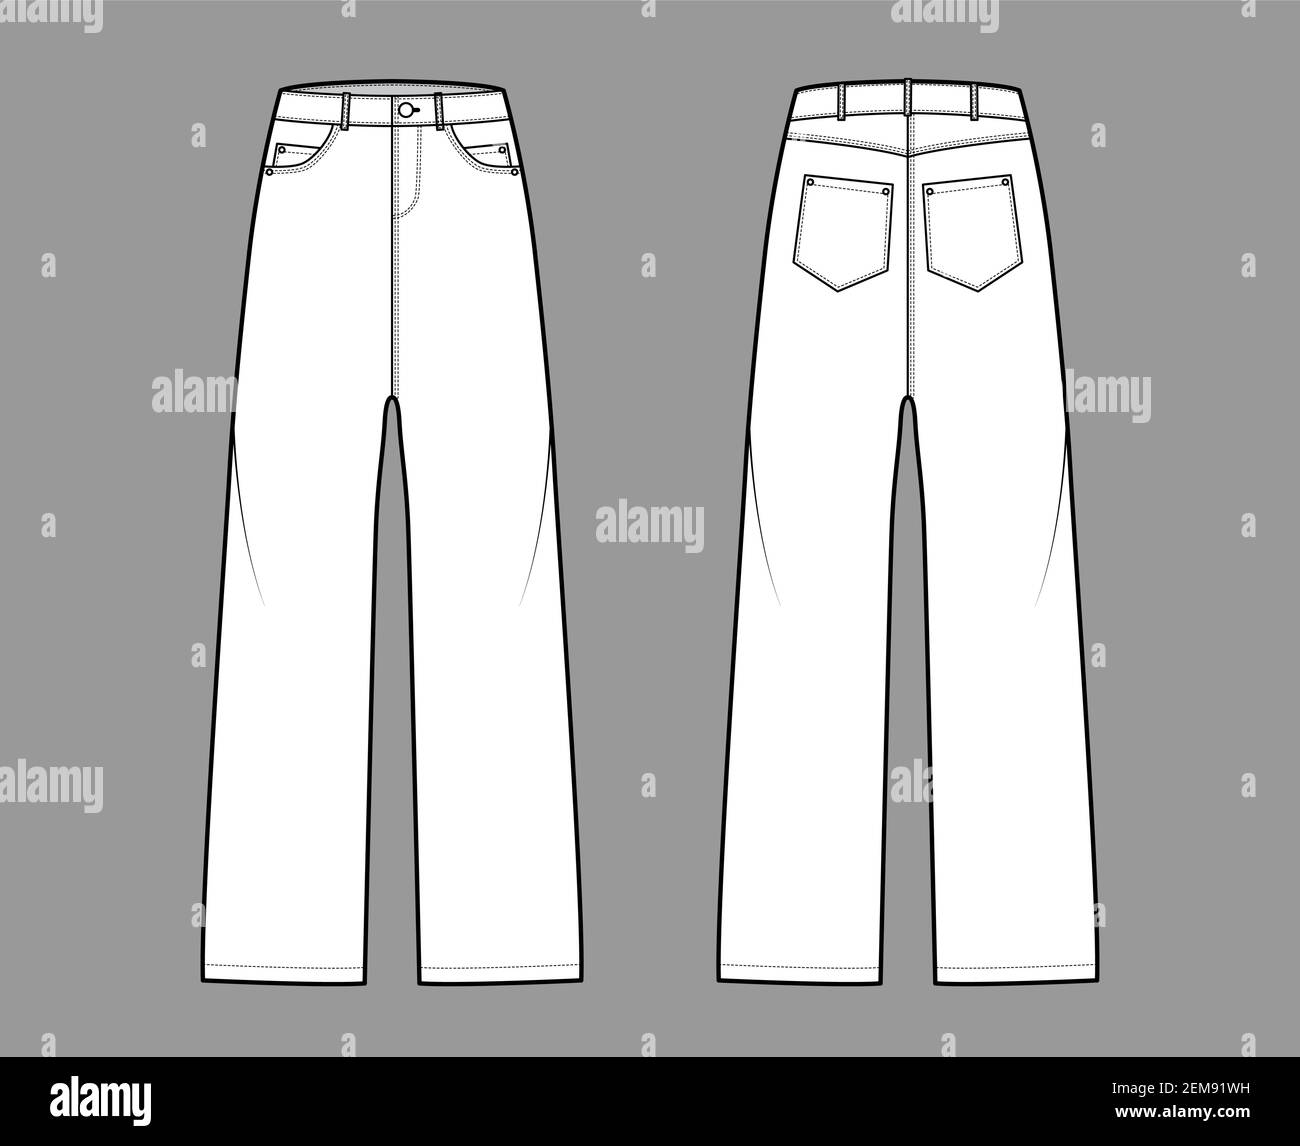 Baggy Jeans Denim pants technical fashion illustration with low waist,  rise, 5 pockets, Rivets, belt loops.